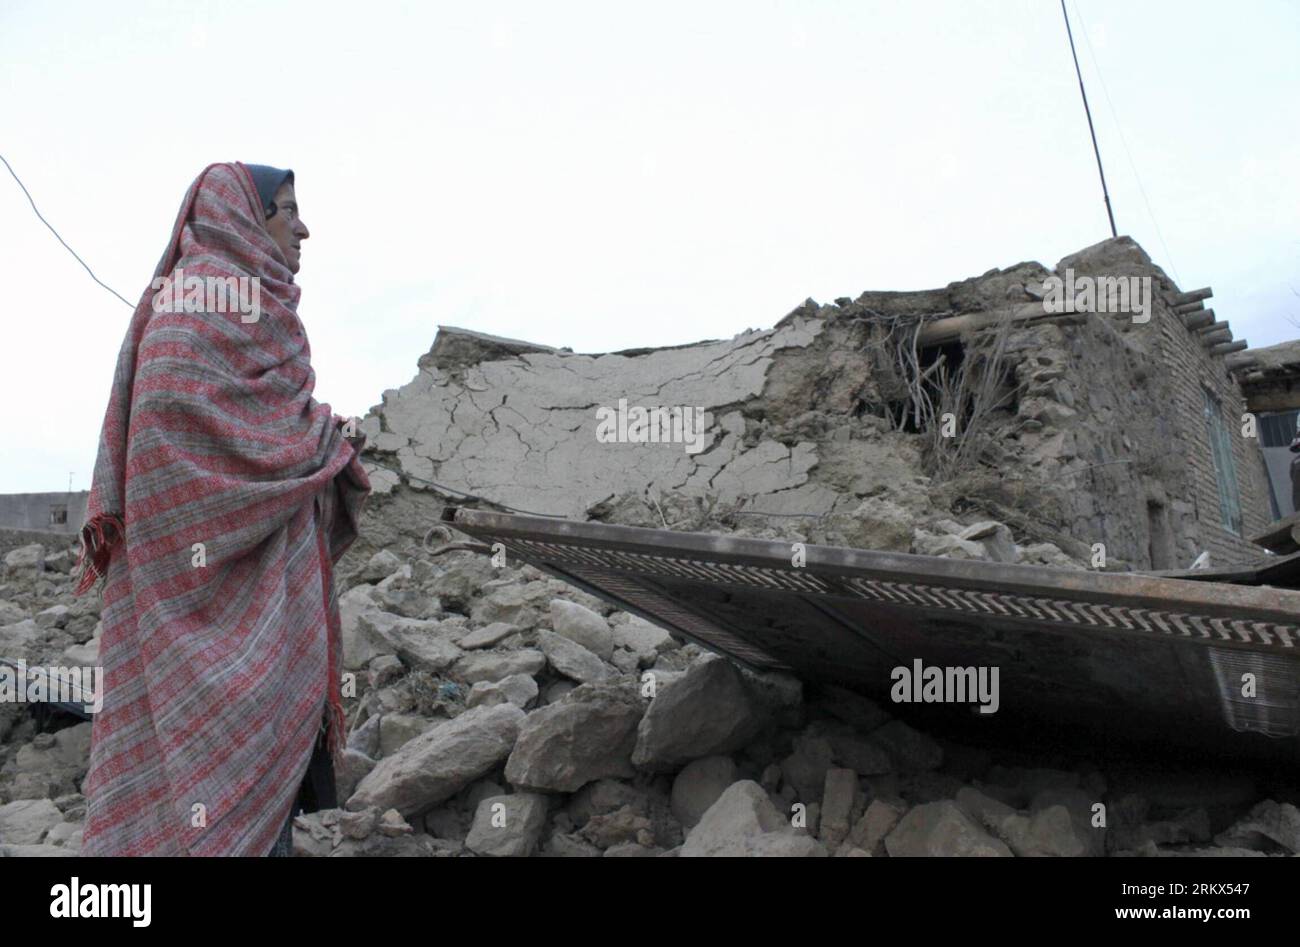 Bildnummer: 58889803  Datum: 06.12.2012  Copyright: imago/Xinhua (121206) -- TEHRAN, Dec. 6, 2012 (Xinhua) -- A woman stands on the debris of destroyed houses after an earthquake in Zahan, eastern Iran, on Dec. 6, 2012. At least 8 were killed after a 5.5-magnitude quake hit Zahan city in eastern Iran s South Khorasan Province at 20:38 p.m. local time (1708 GMT) on Wednesday, the state TV reported. (Xinhua/Mojtaba Gorgi) (nxl) IRAN-ZAHAN-QUAKE PUBLICATIONxNOTxINxCHN Gesellschaft Naturkatastrophe Erdbeben premiumd x0x xmb 2012 quer      58889803 Date 06 12 2012 Copyright Imago XINHUA  TEHRAN DEC Stock Photo